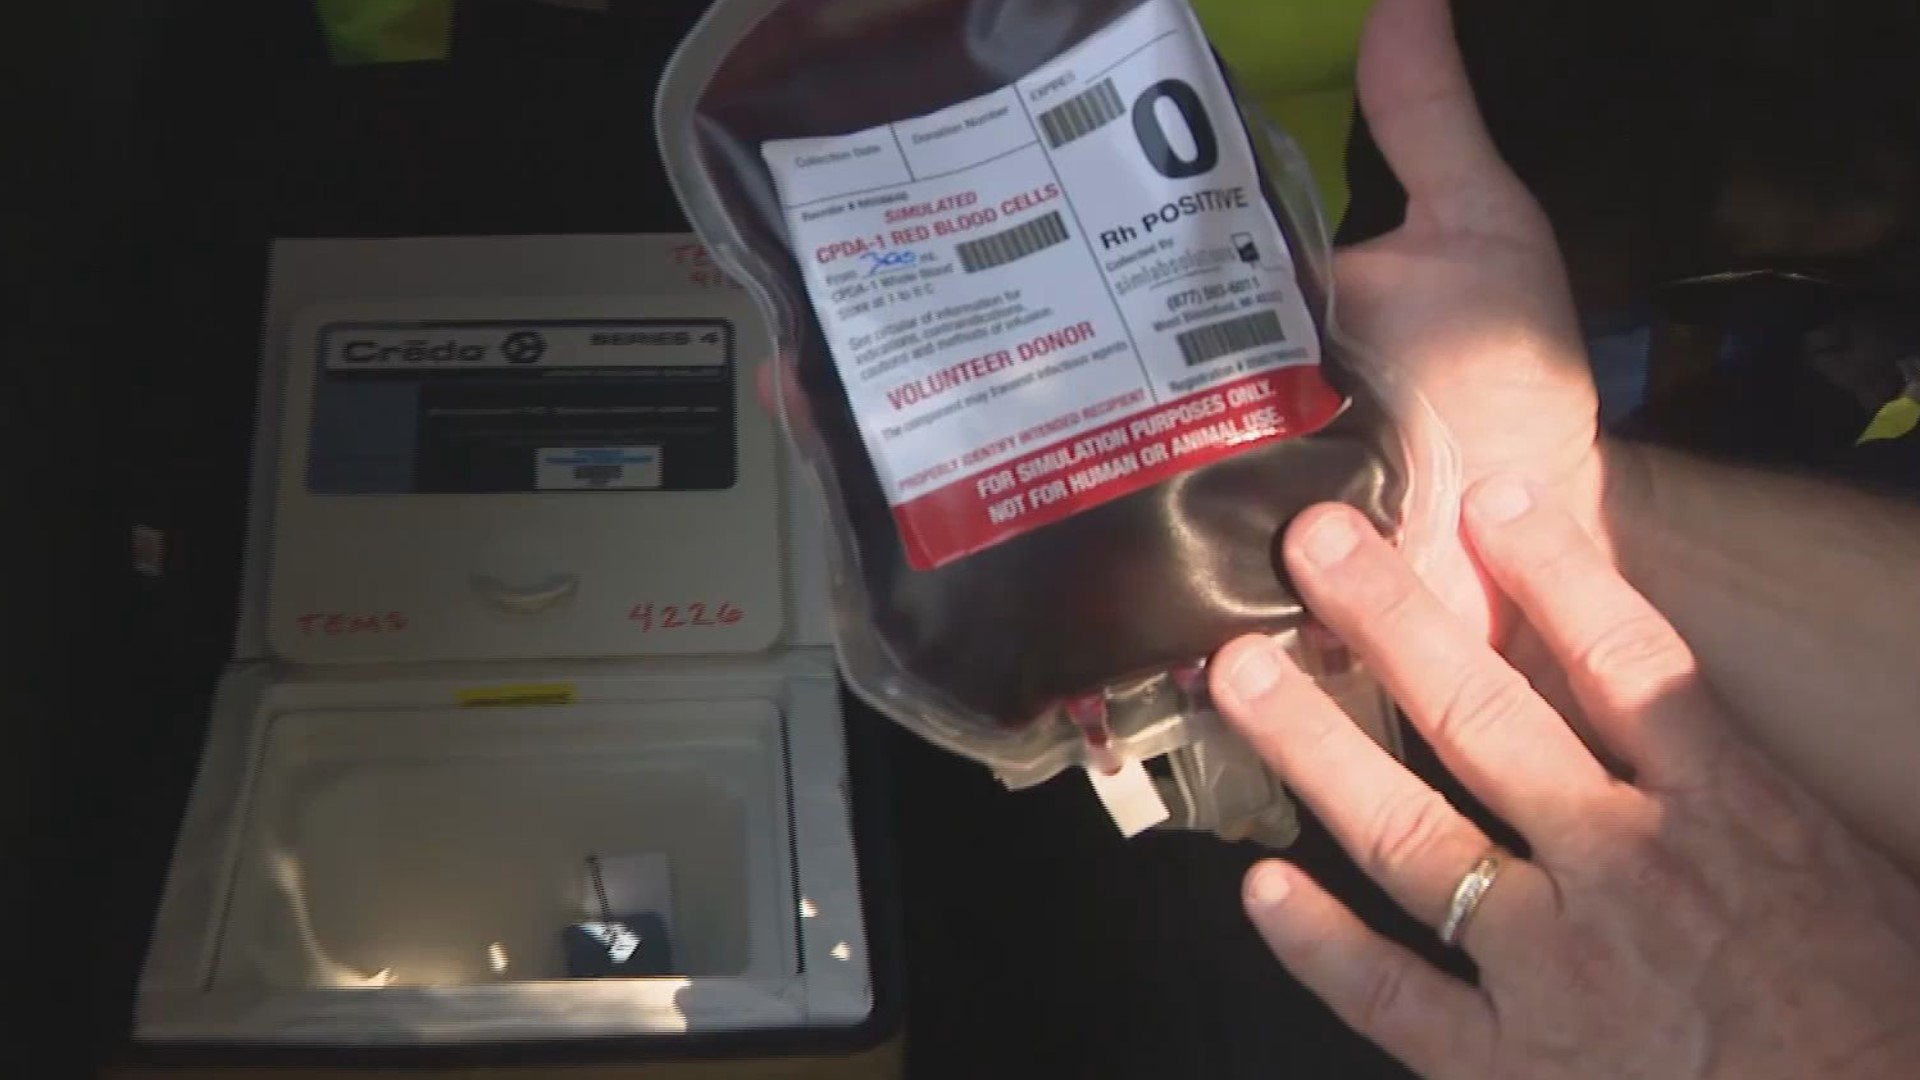 Over the last several months, first responders in Virginia Beach and Chesapeake have carried blood in the field.